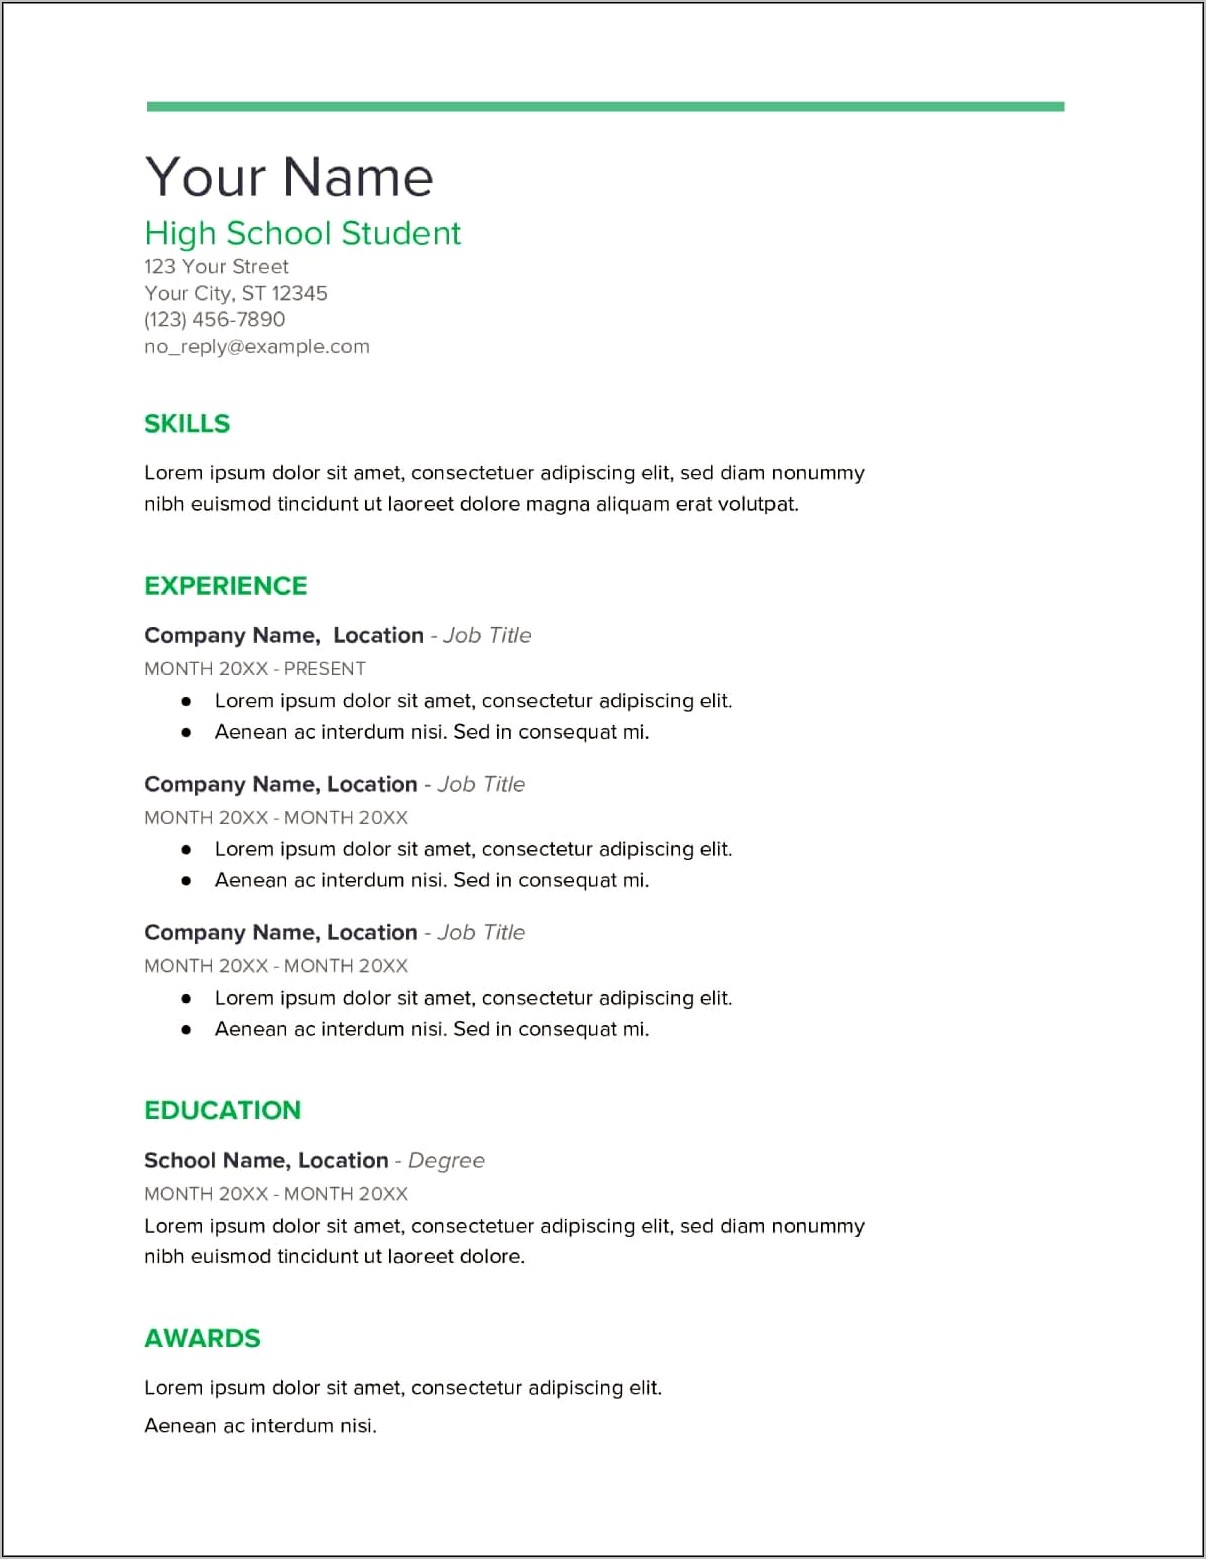 Resume Template For First Job Higschool Student